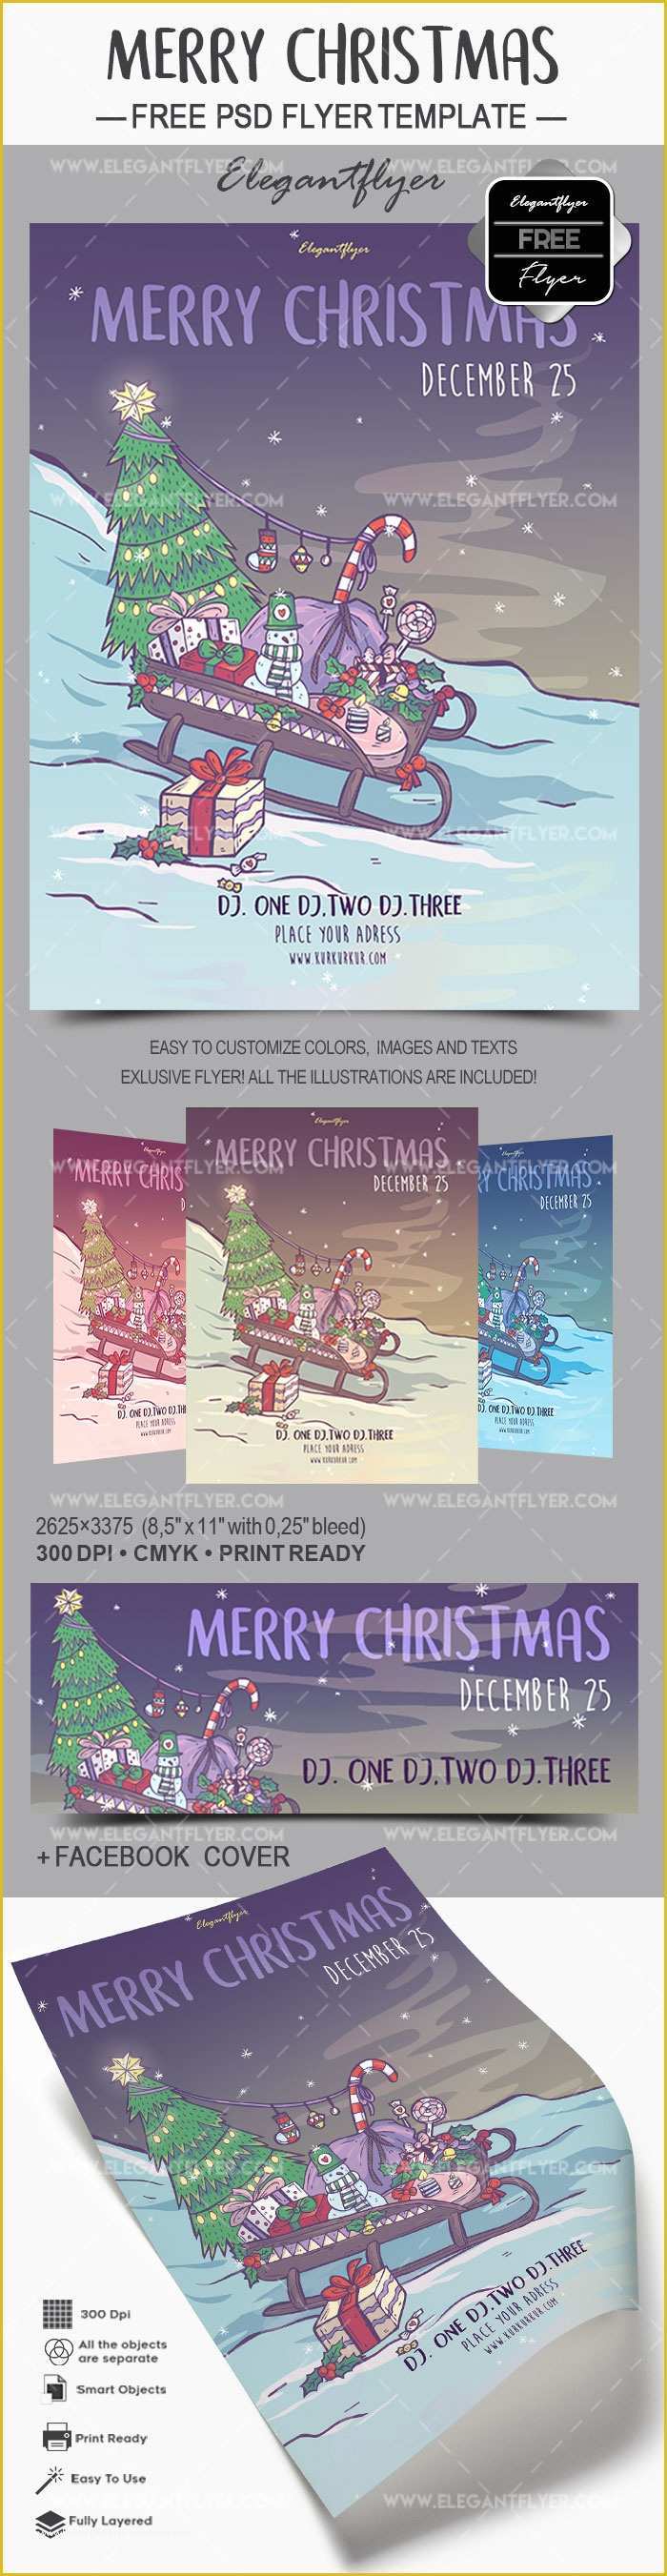 Christmas Flyers Templates Free Psd Of Merry Christmas – Free Flyer Psd Template – by Elegantflyer